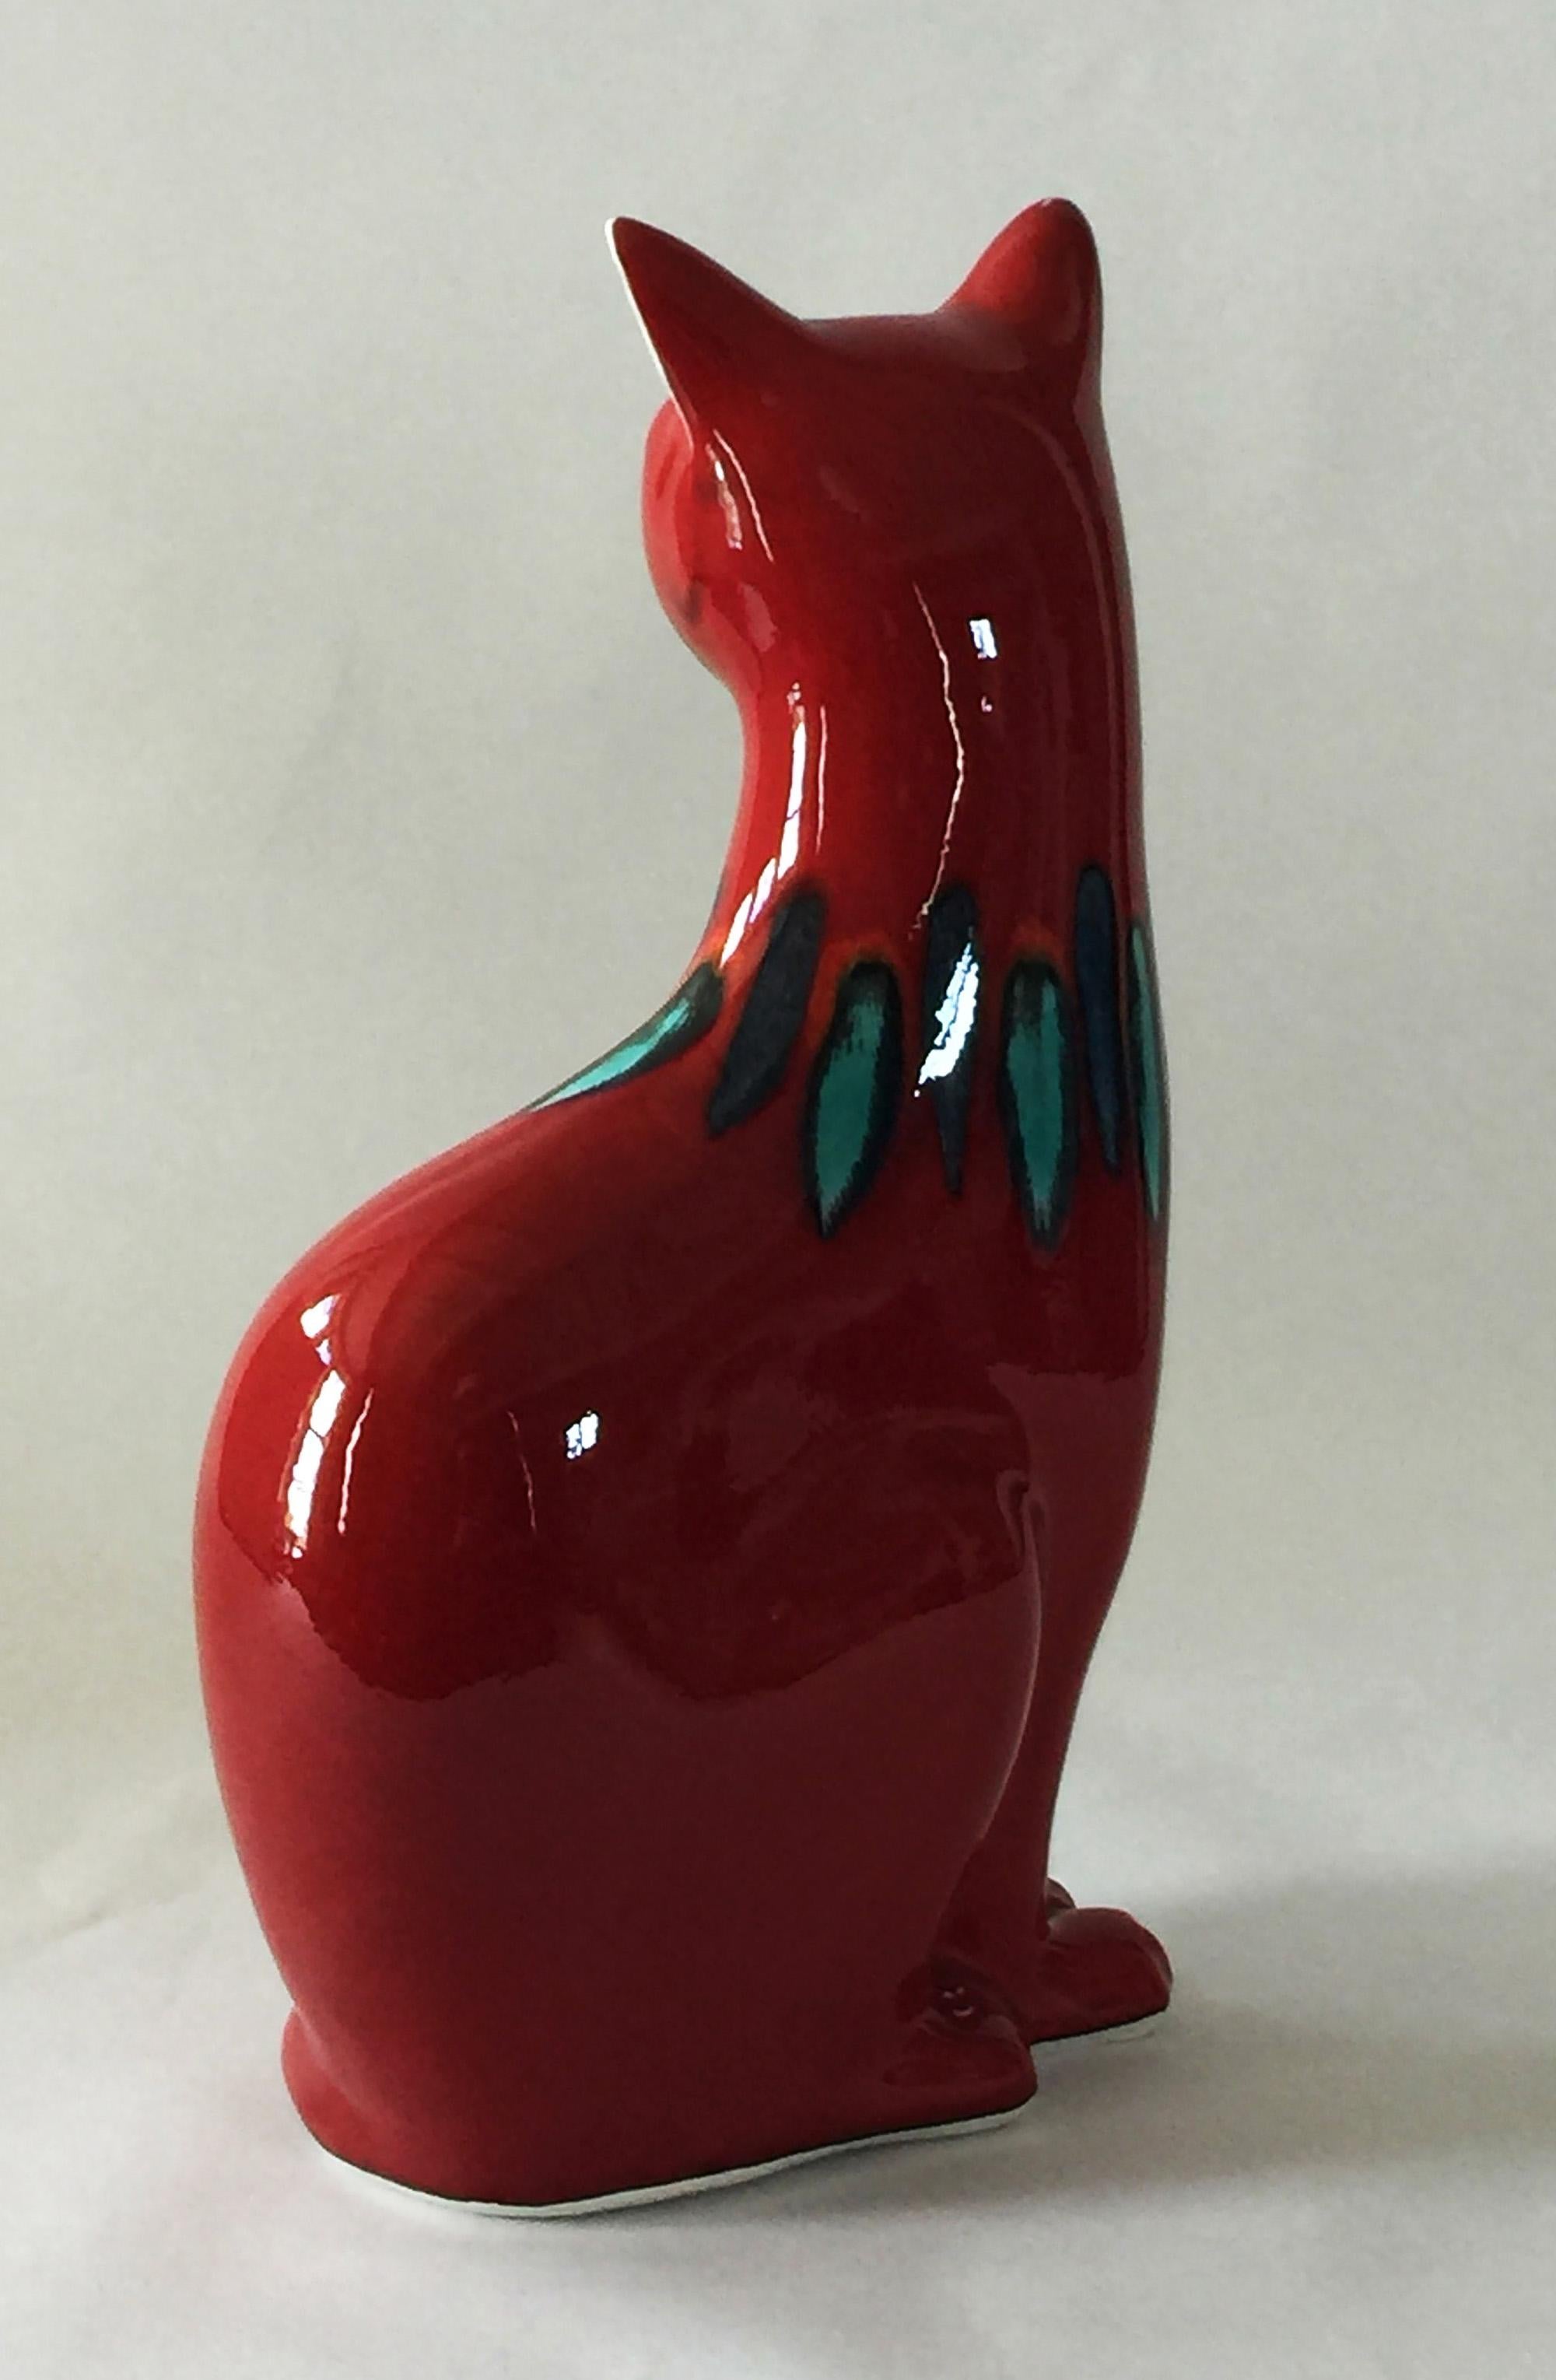 Red Flambé poole pottery delphis cat in perfect condition.